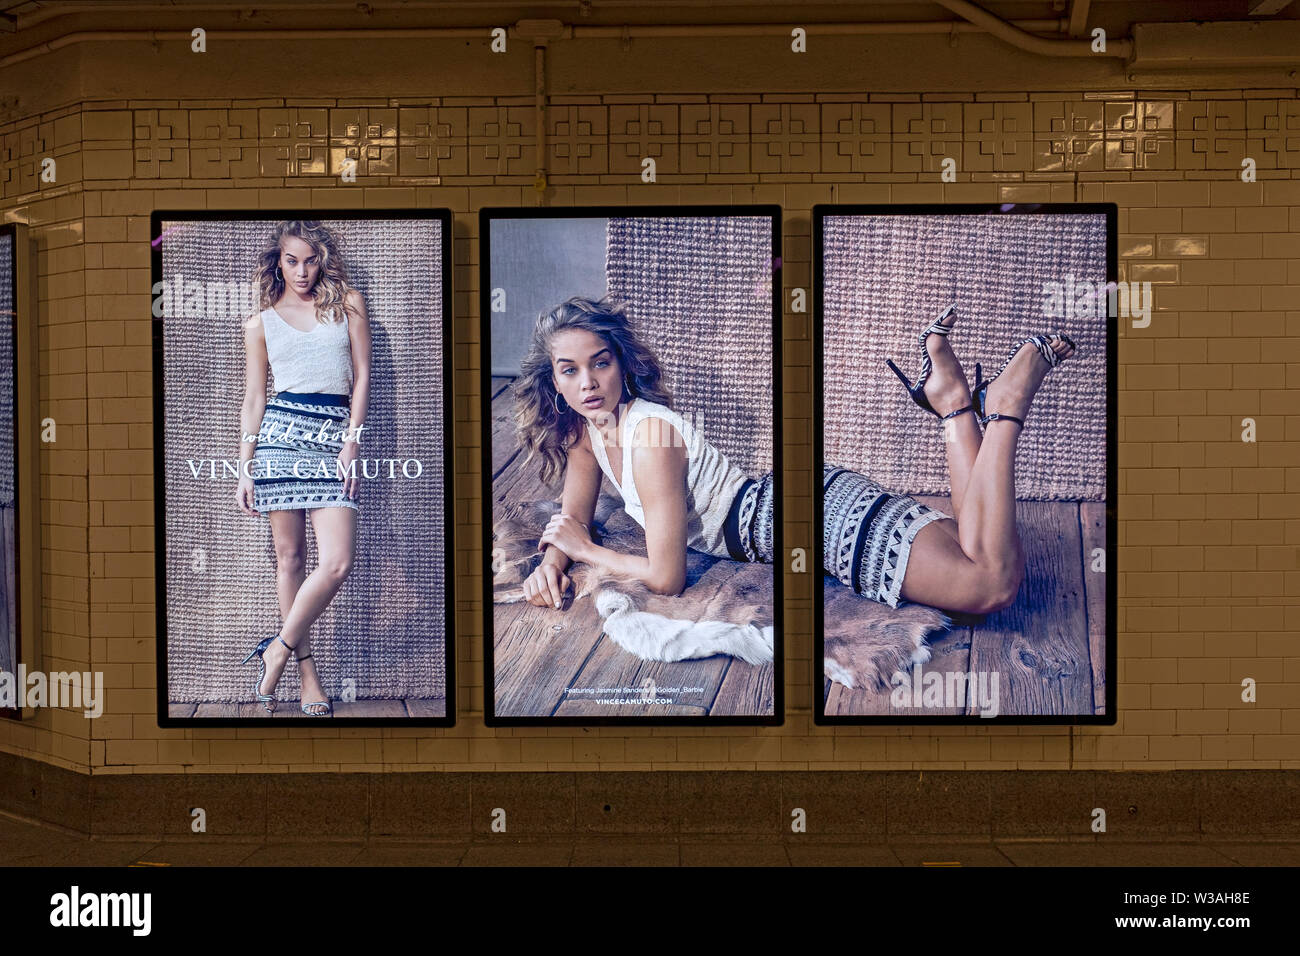 TRIPTYCH. A co-ordinated 3 panel screen with moving images advertising for Vince Camuto, the Nine West fashion designer. At a subway station in NYC. Stock Photo